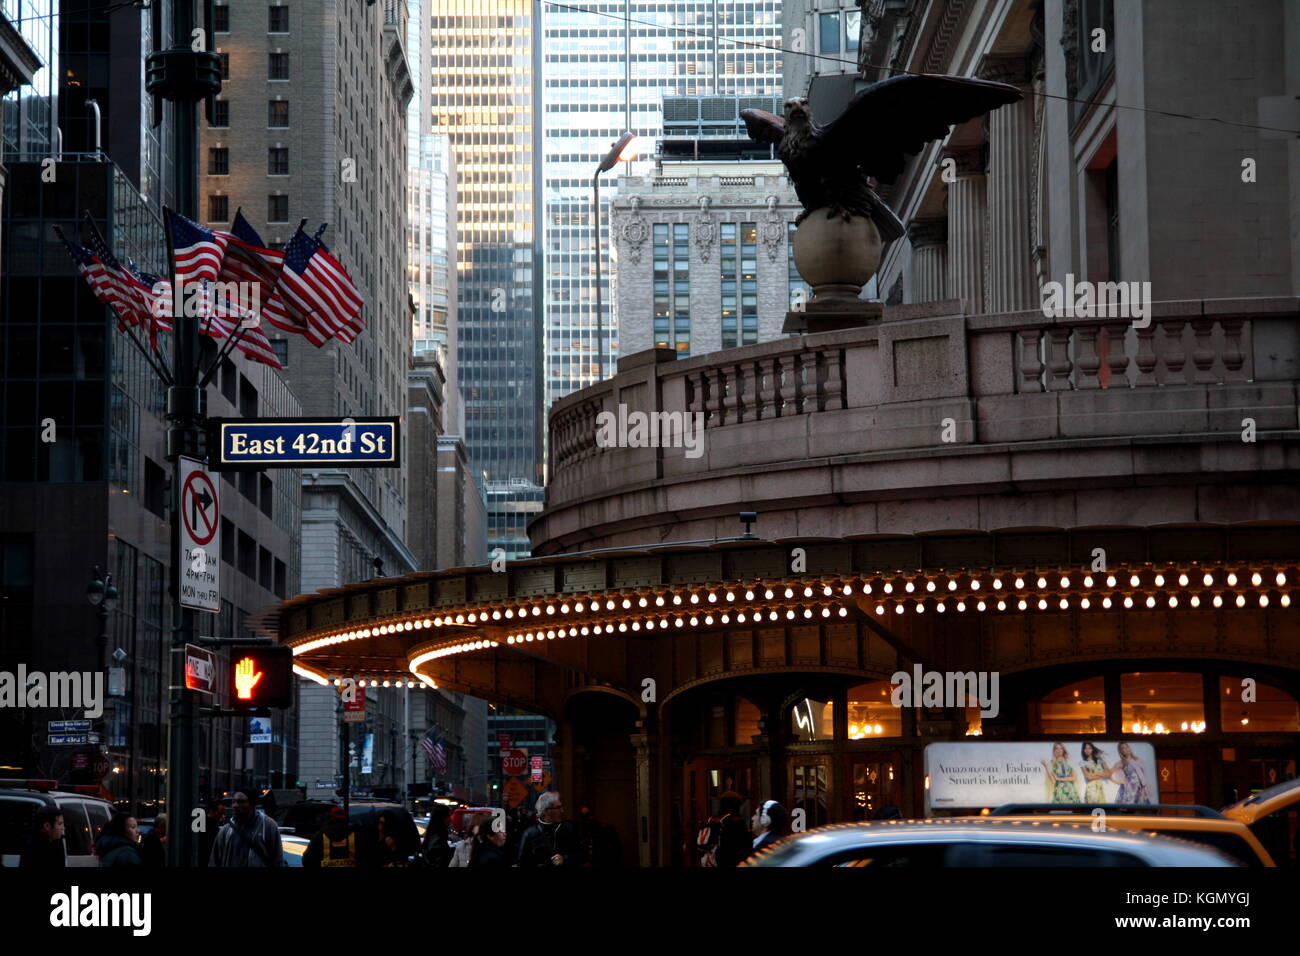 The main entrance of Grand Central Station with the eagle statue, New york City. Stock Photo